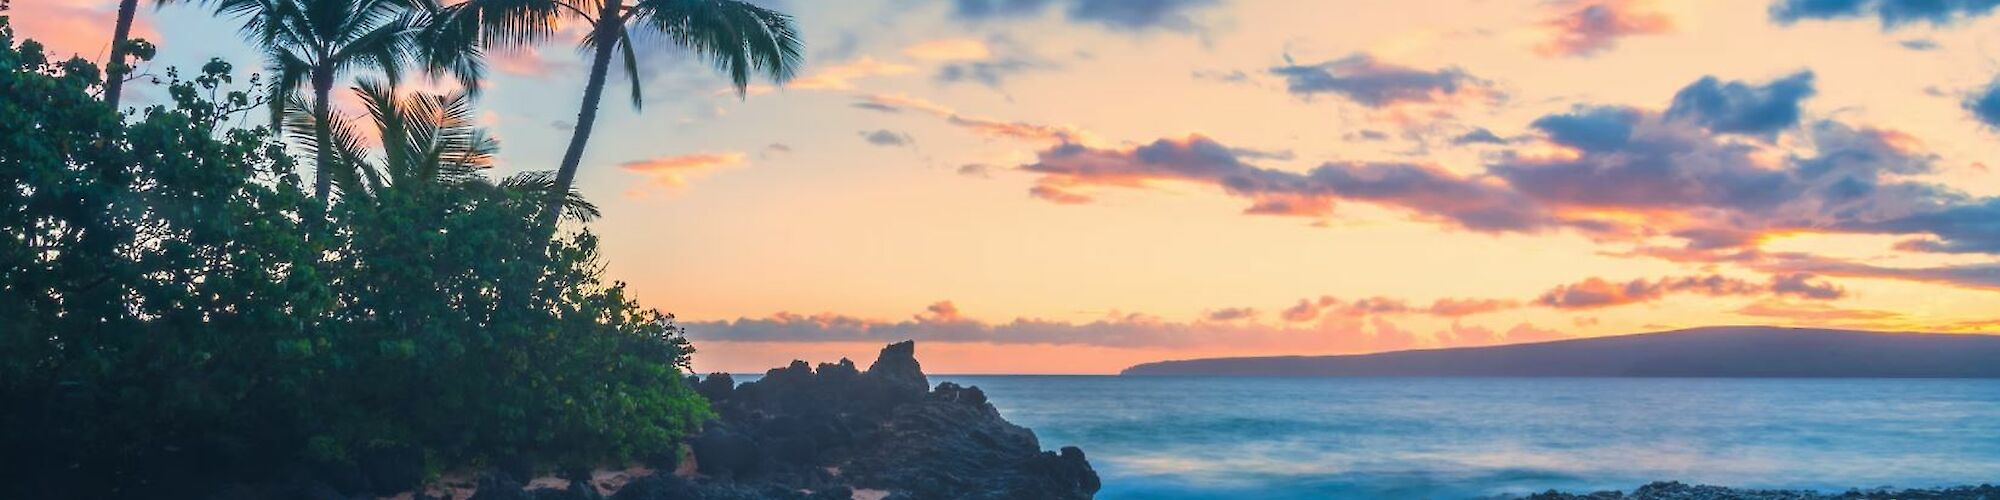 A tropical beach scene at sunset with palm trees, rocky shoreline, calm waves, and colorful sky.